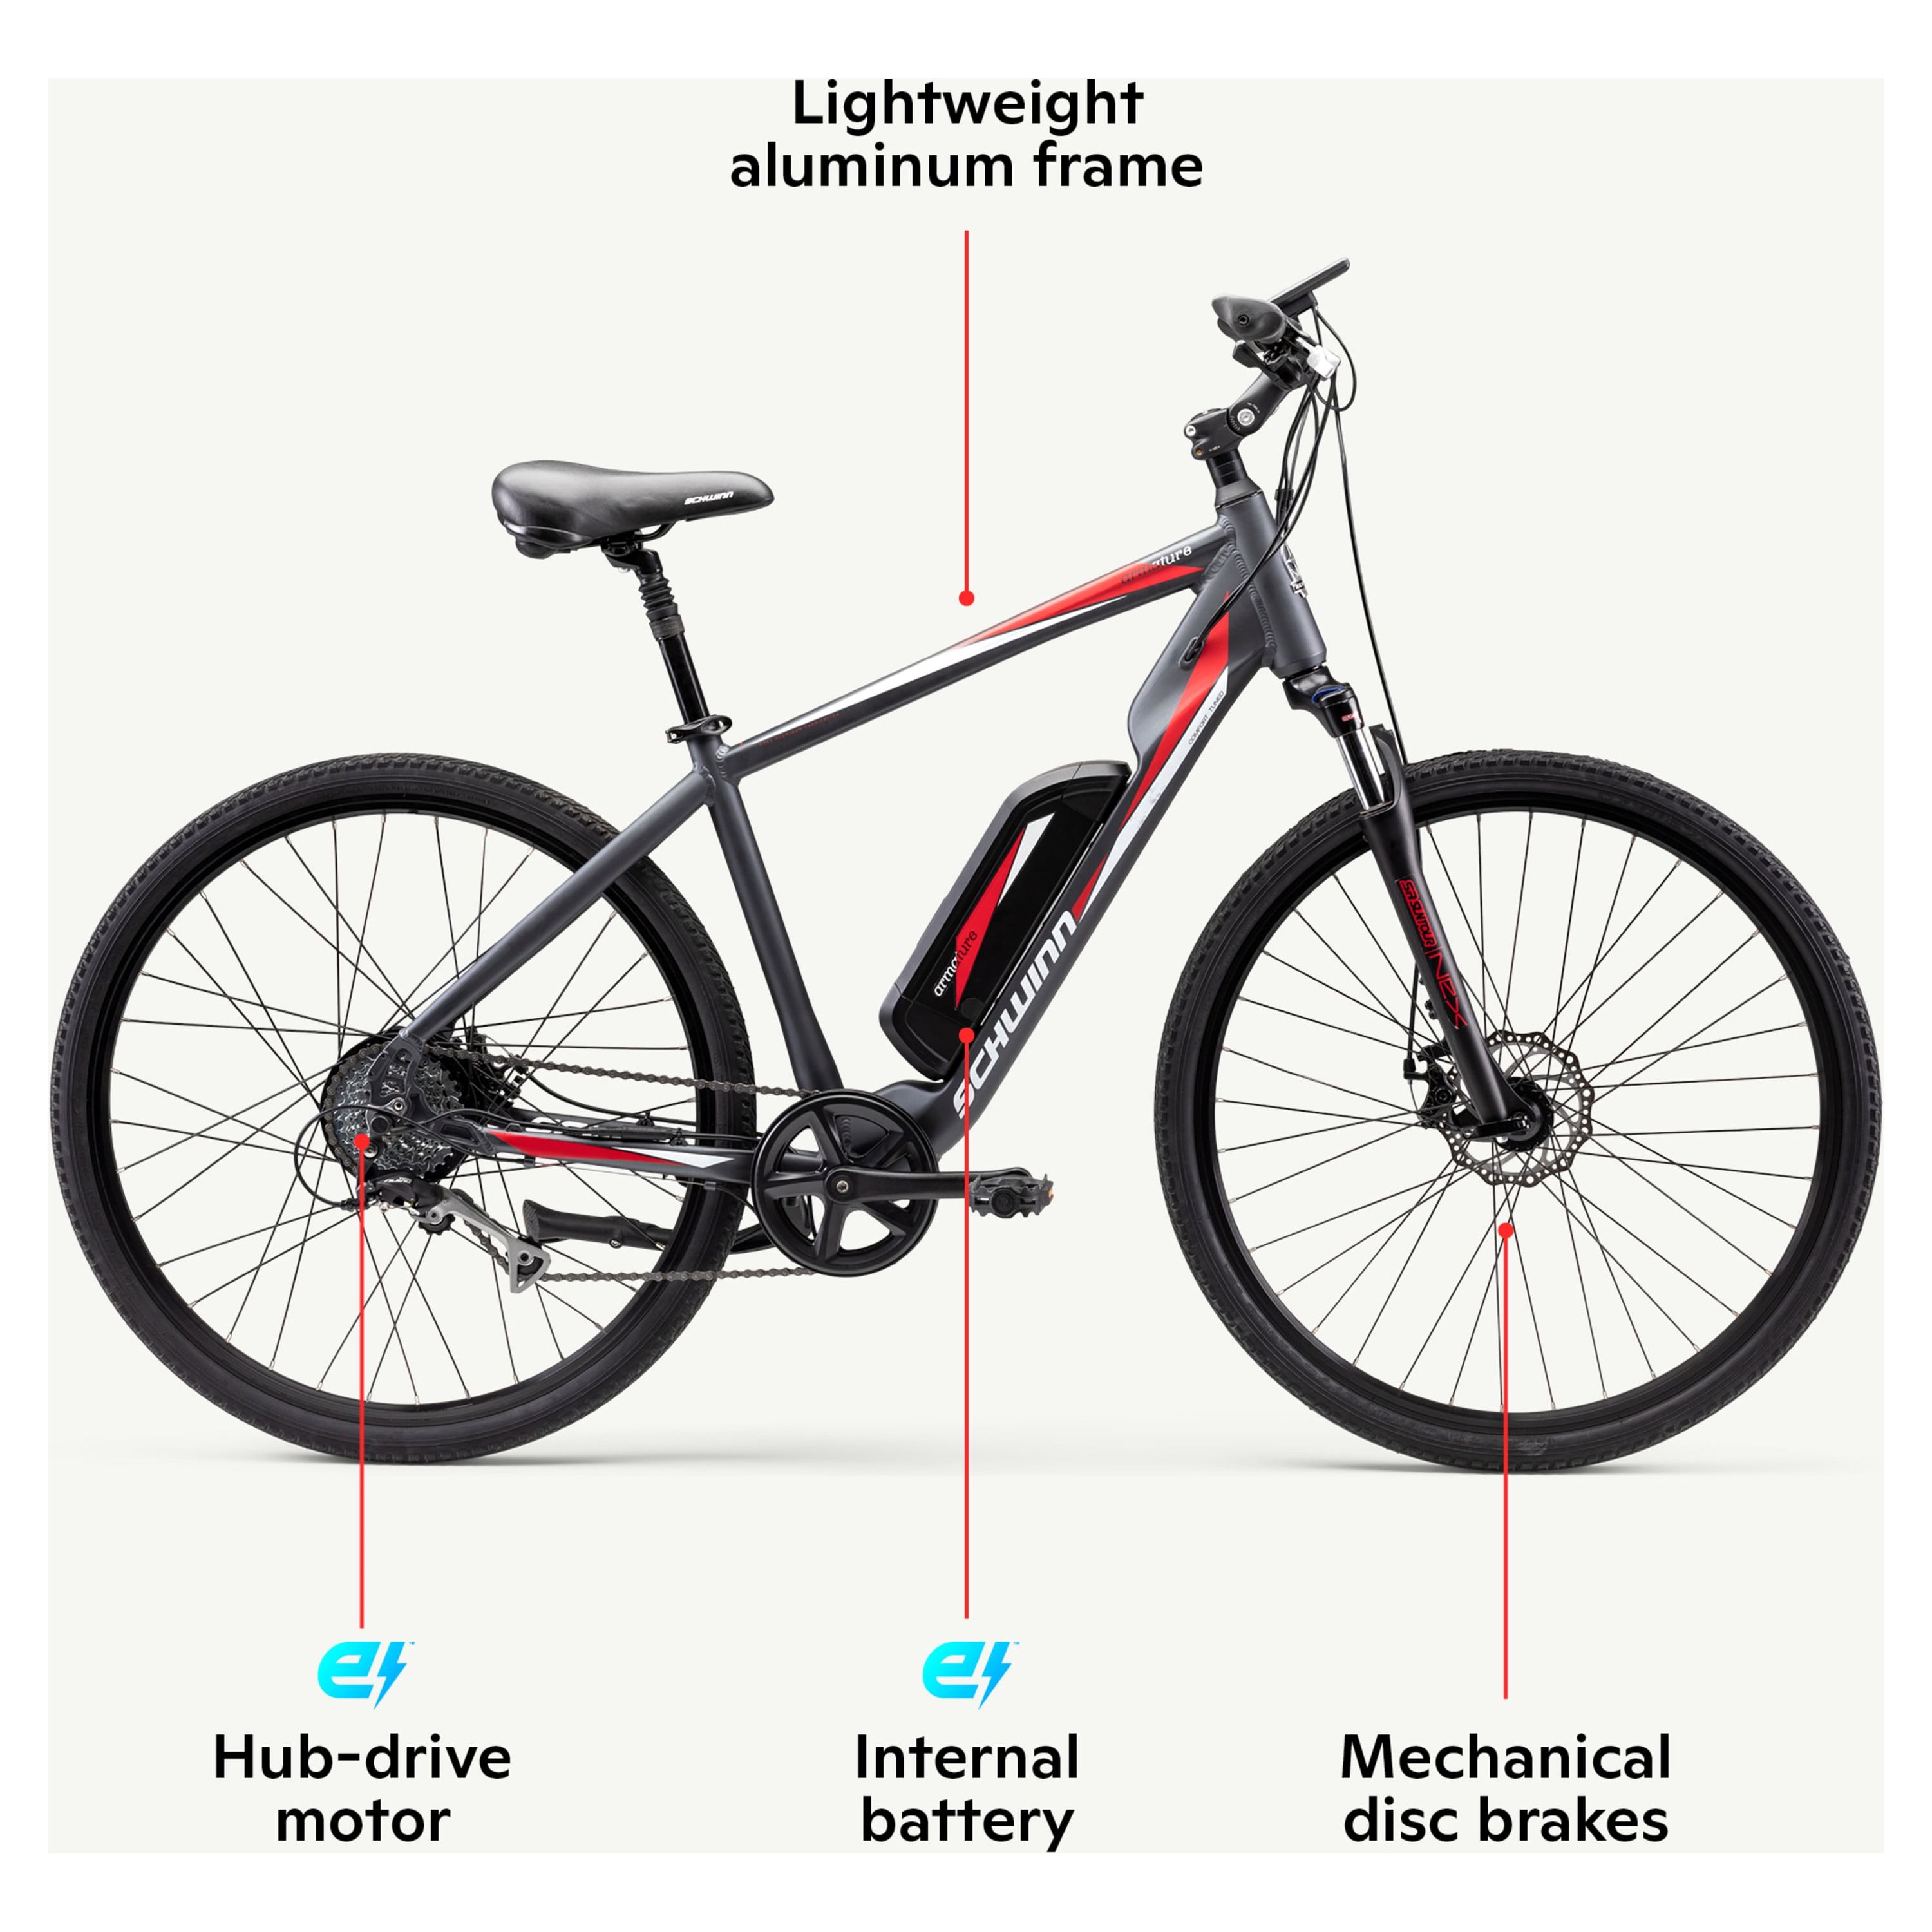 Schwinn 700c Armature Unisex Electric Bike, Black and Red Ebike, Small Frame for Adults - image 3 of 9